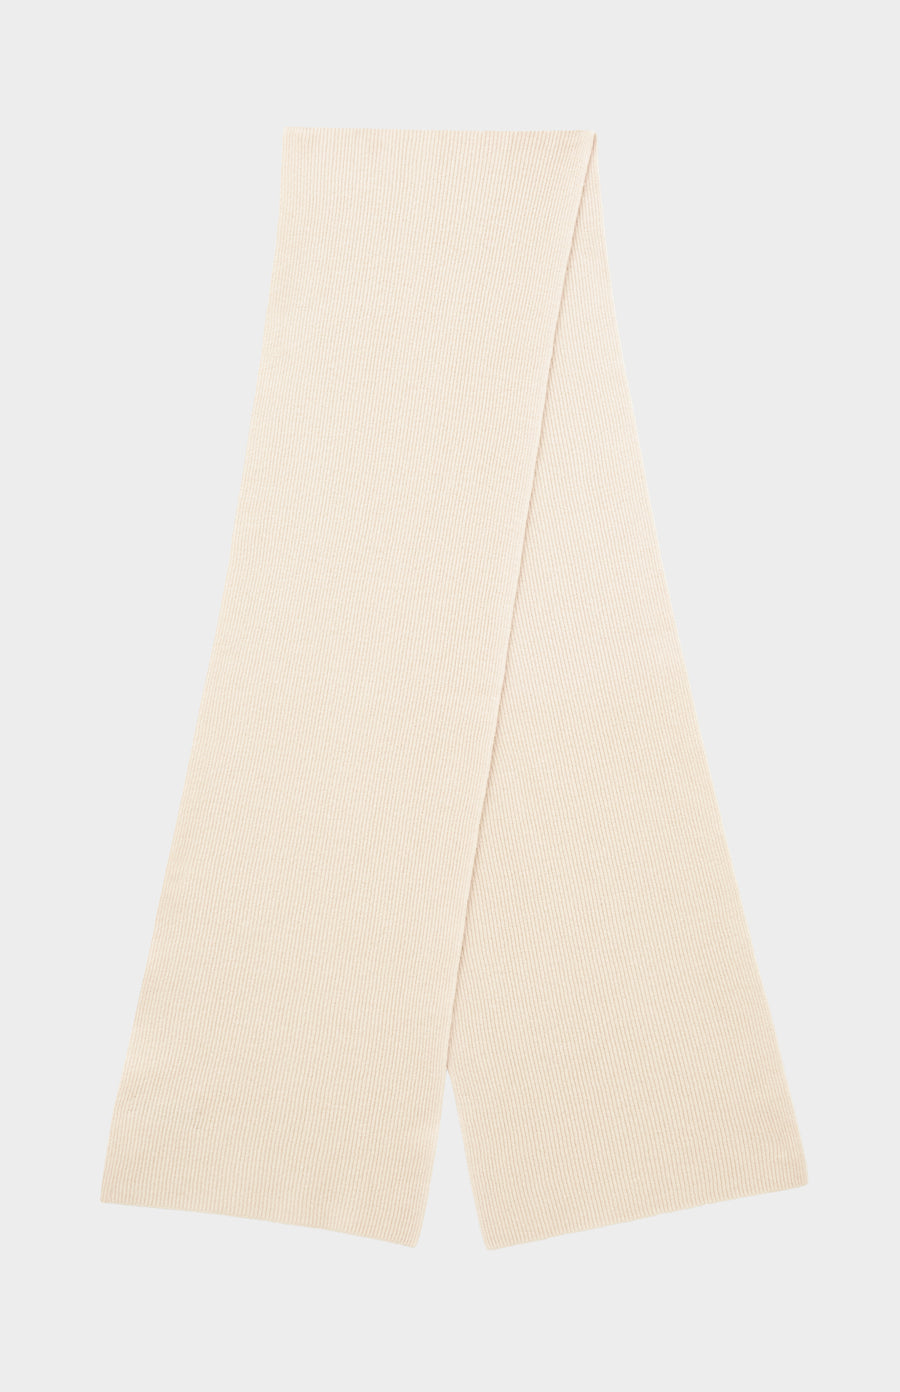 Pringle Cashmere Blend Scarf with Allover Fine Rib in Pink Champagne